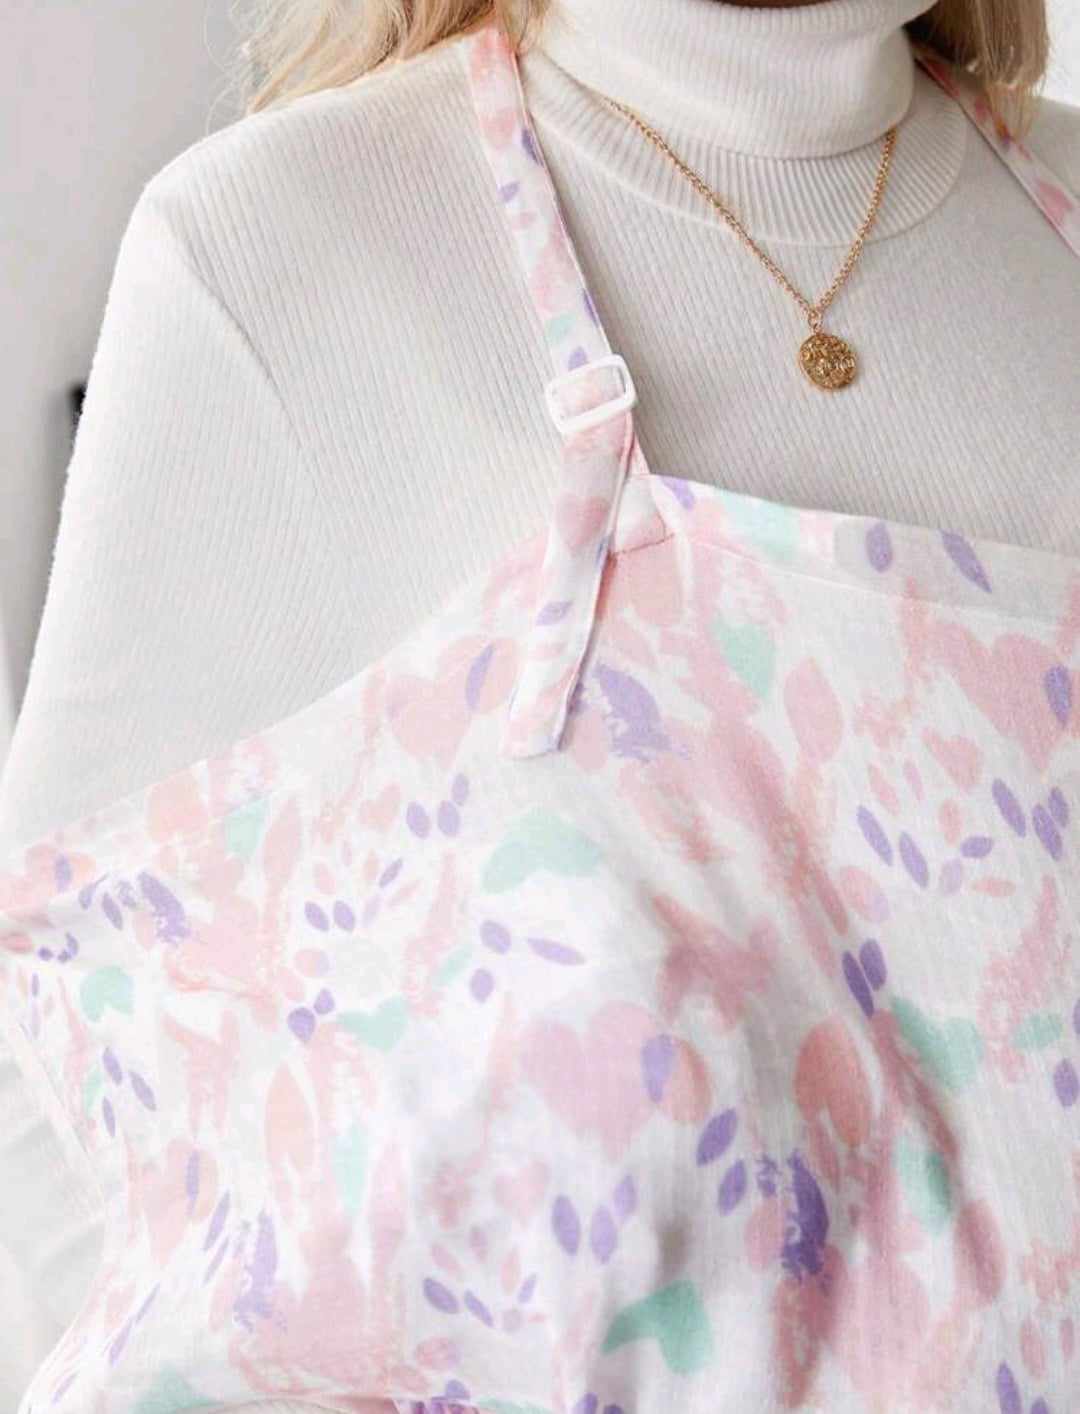 NURSING COVER FOR BABY (Pink Flowers)